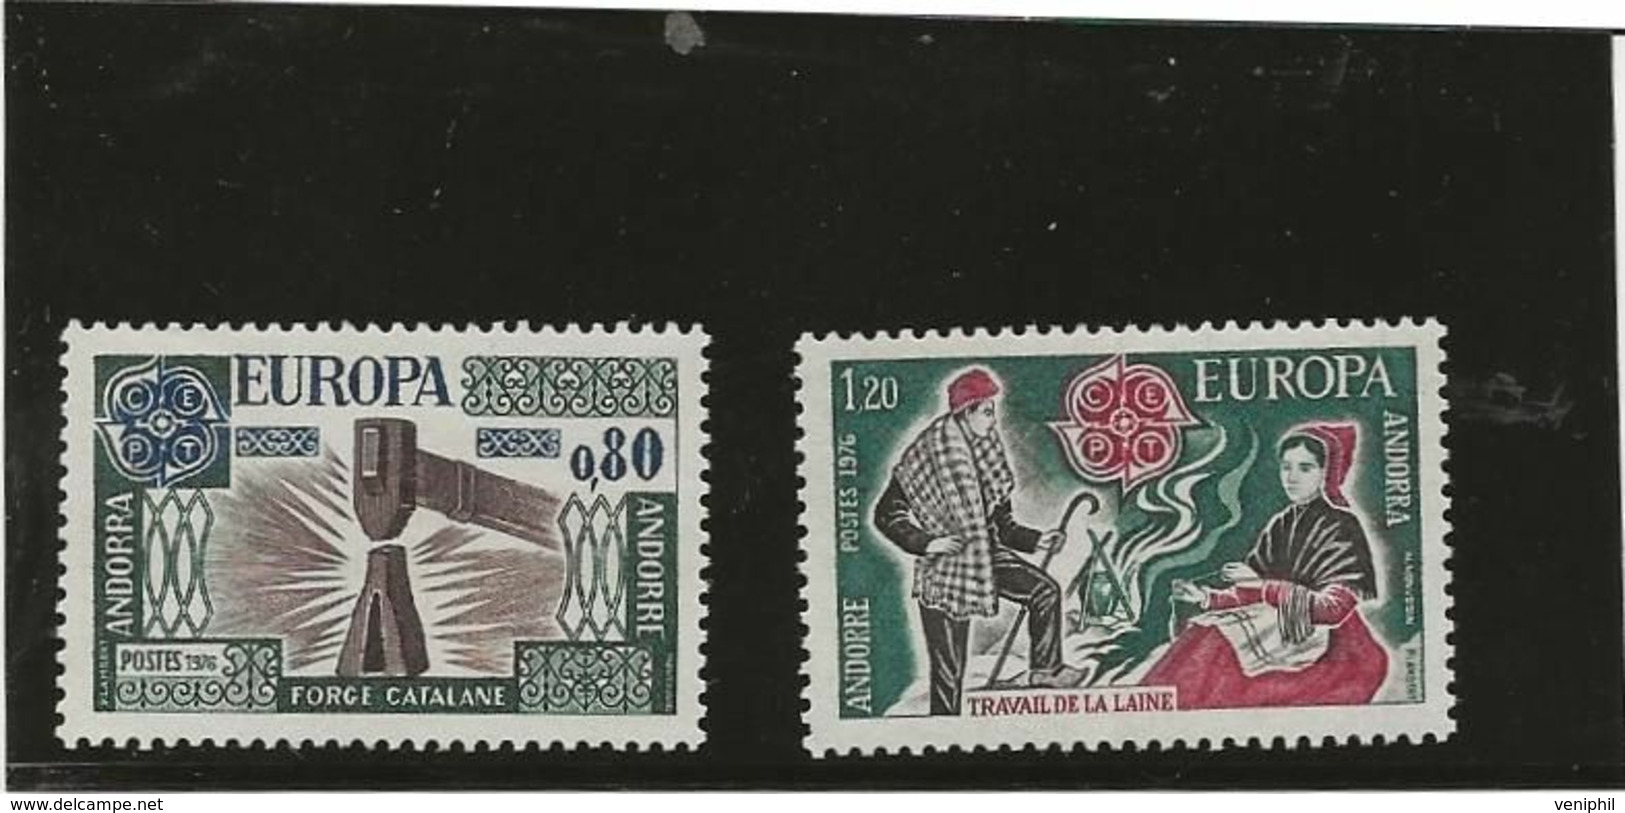 ANDORRE - TIMBRES EUROPA N° 253 Et 254 NEUF SANS CHARNIERE -ANNEE 1976 - COTE : 14,00 € € - Nuovi